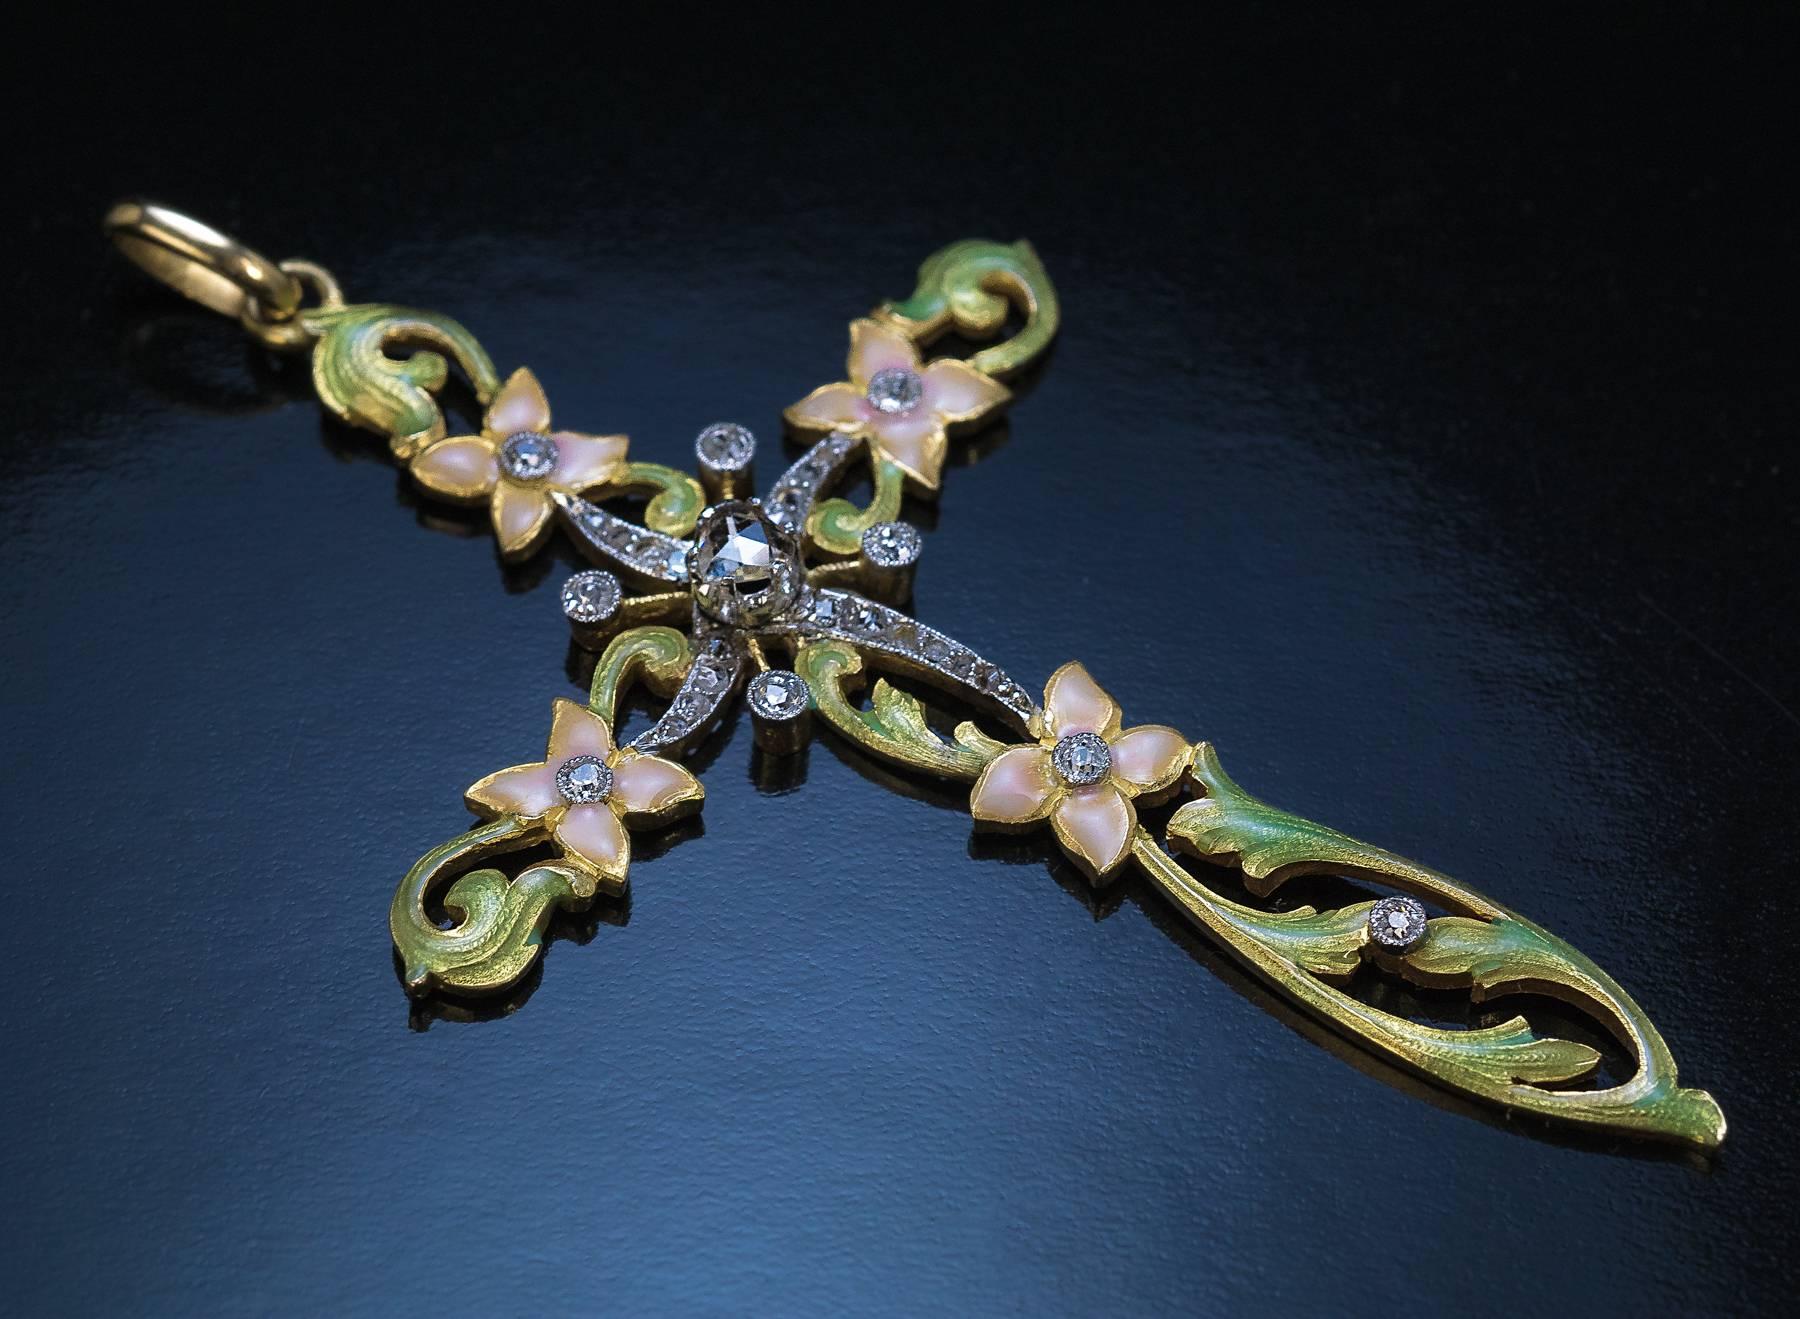 Circa 1910

A superb Art Nouveau 18K gold openwork cross pendant with a diamond-set platinum center.

The front of this large cross is embellished with pastel rose and golden green enamels. The cross is centered with a pear shape rose cut